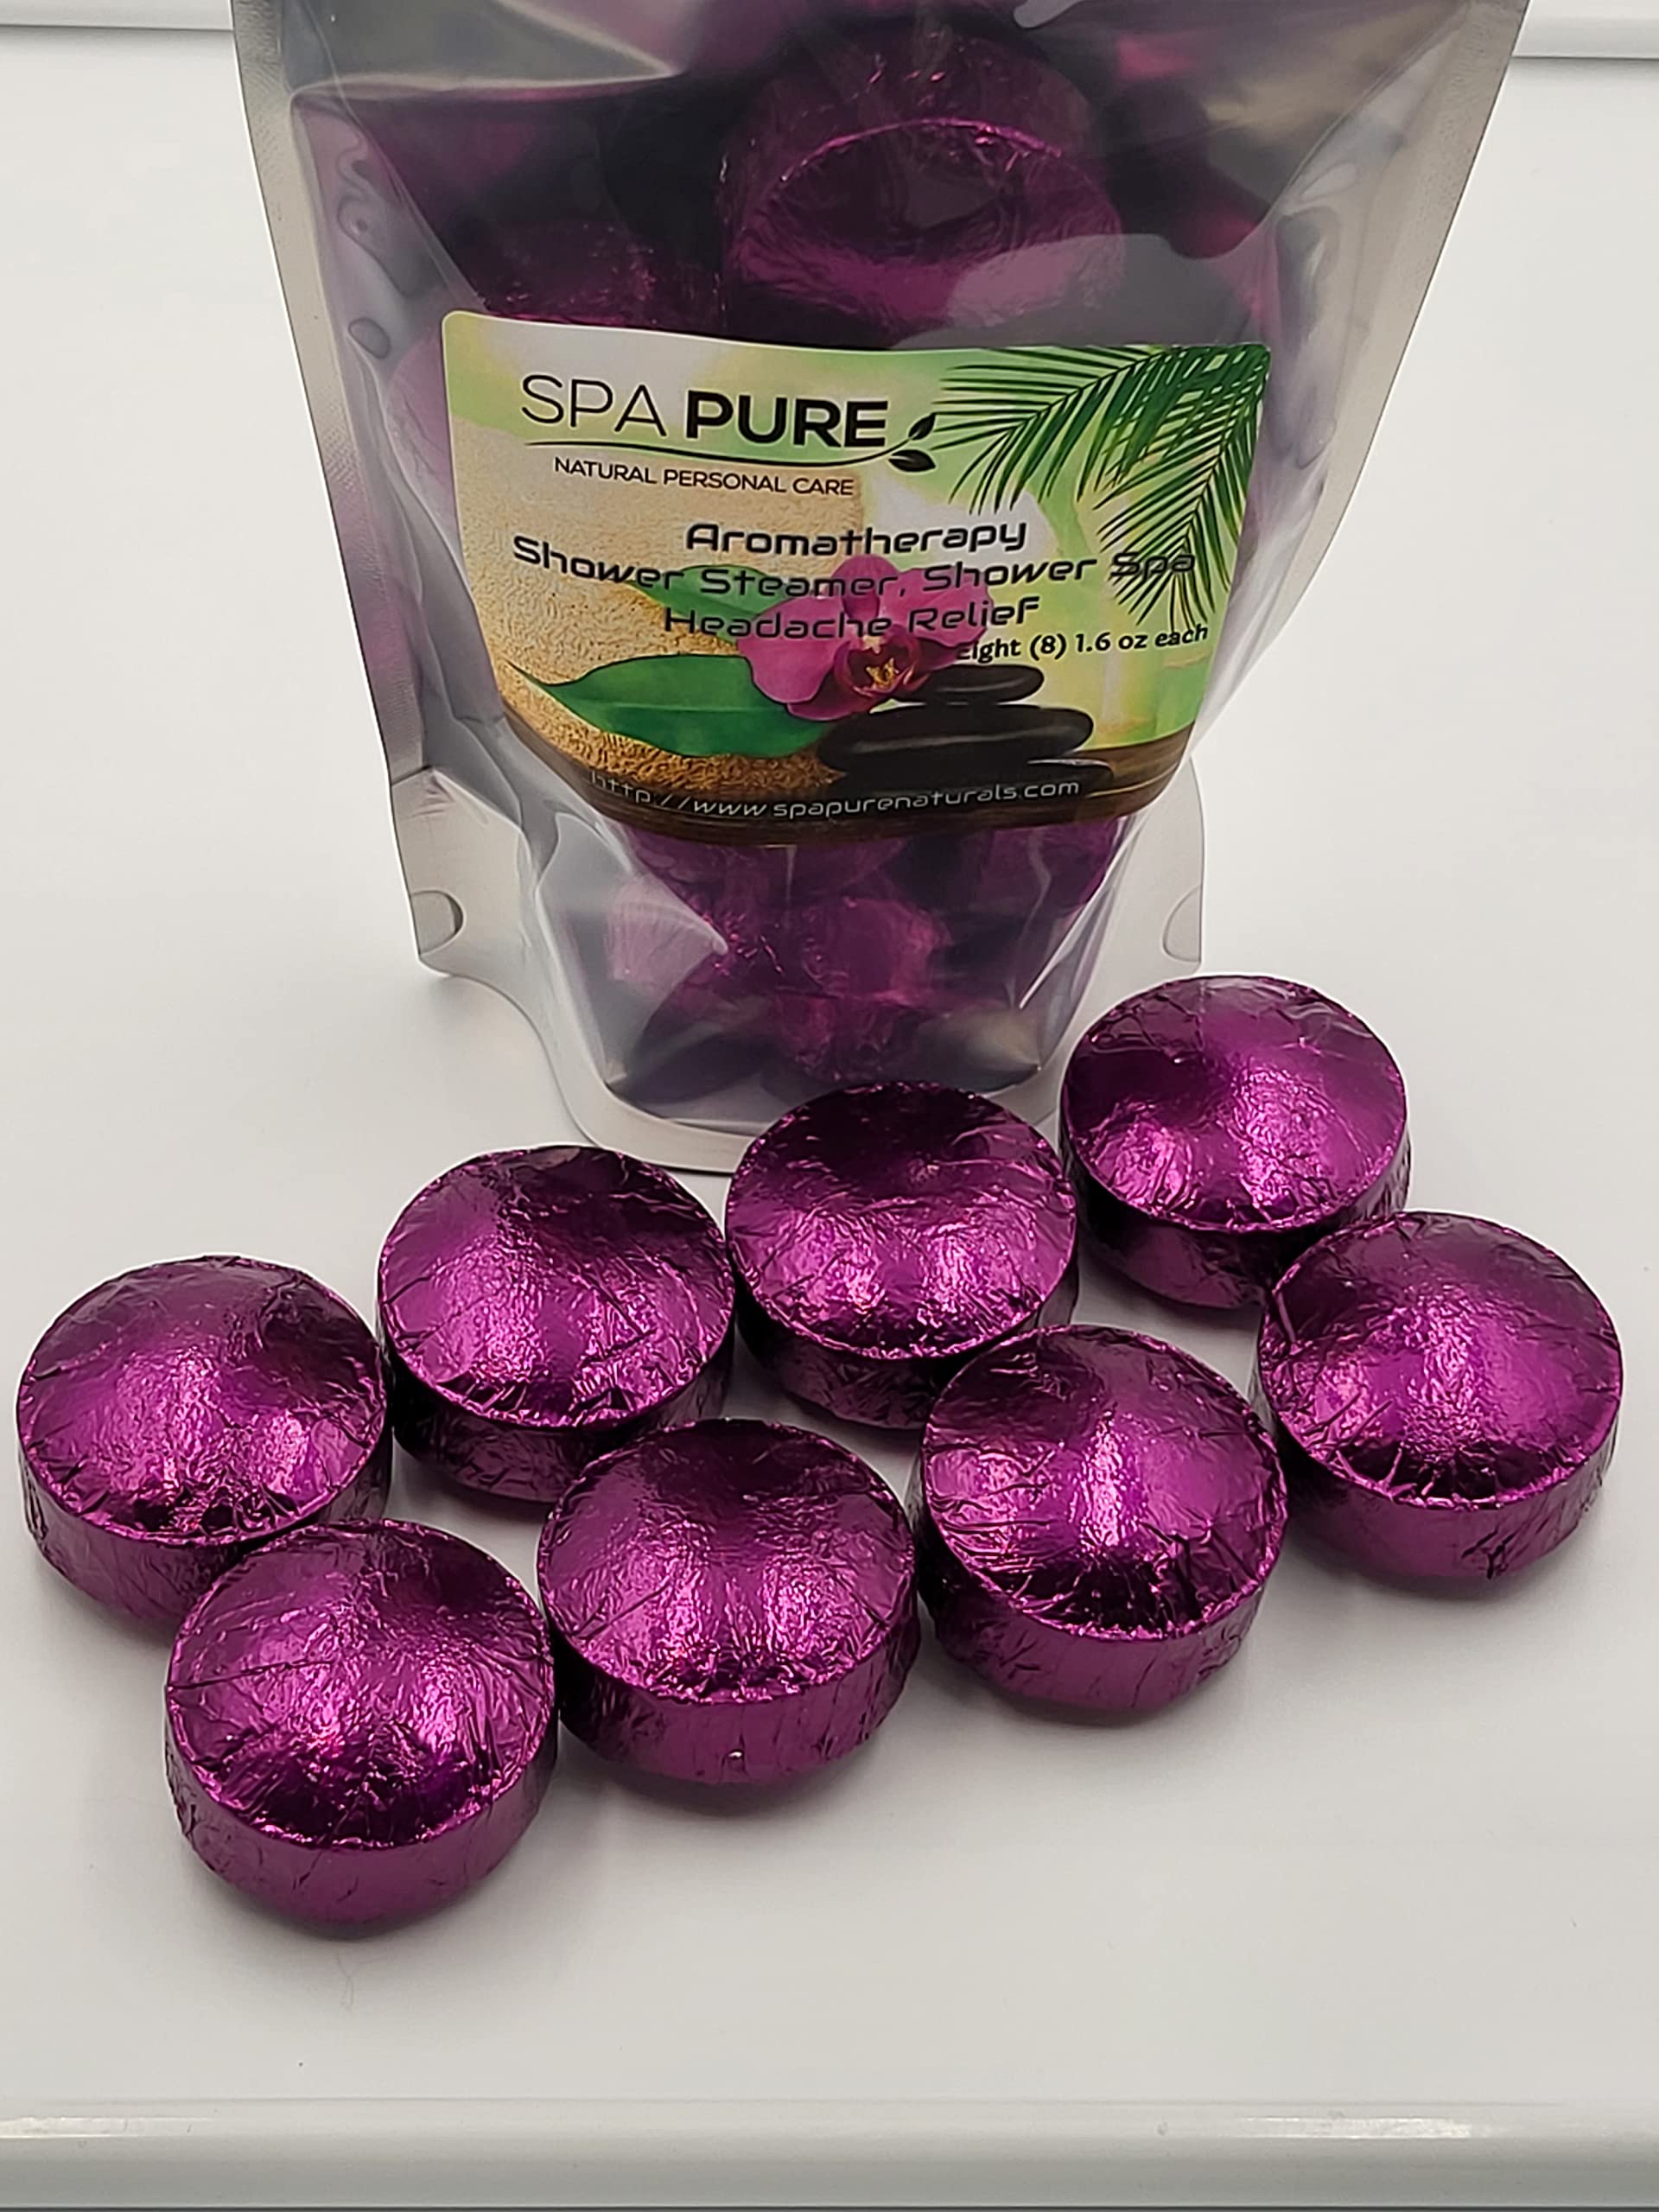 Spa Pure Headache Relief Aromatherapy: Shower Bombs USA Made with 100% Natural/Organic Essential Oils - Lavender, Eucalyptus - Transform Your Shower (8 Count) Pack of 1